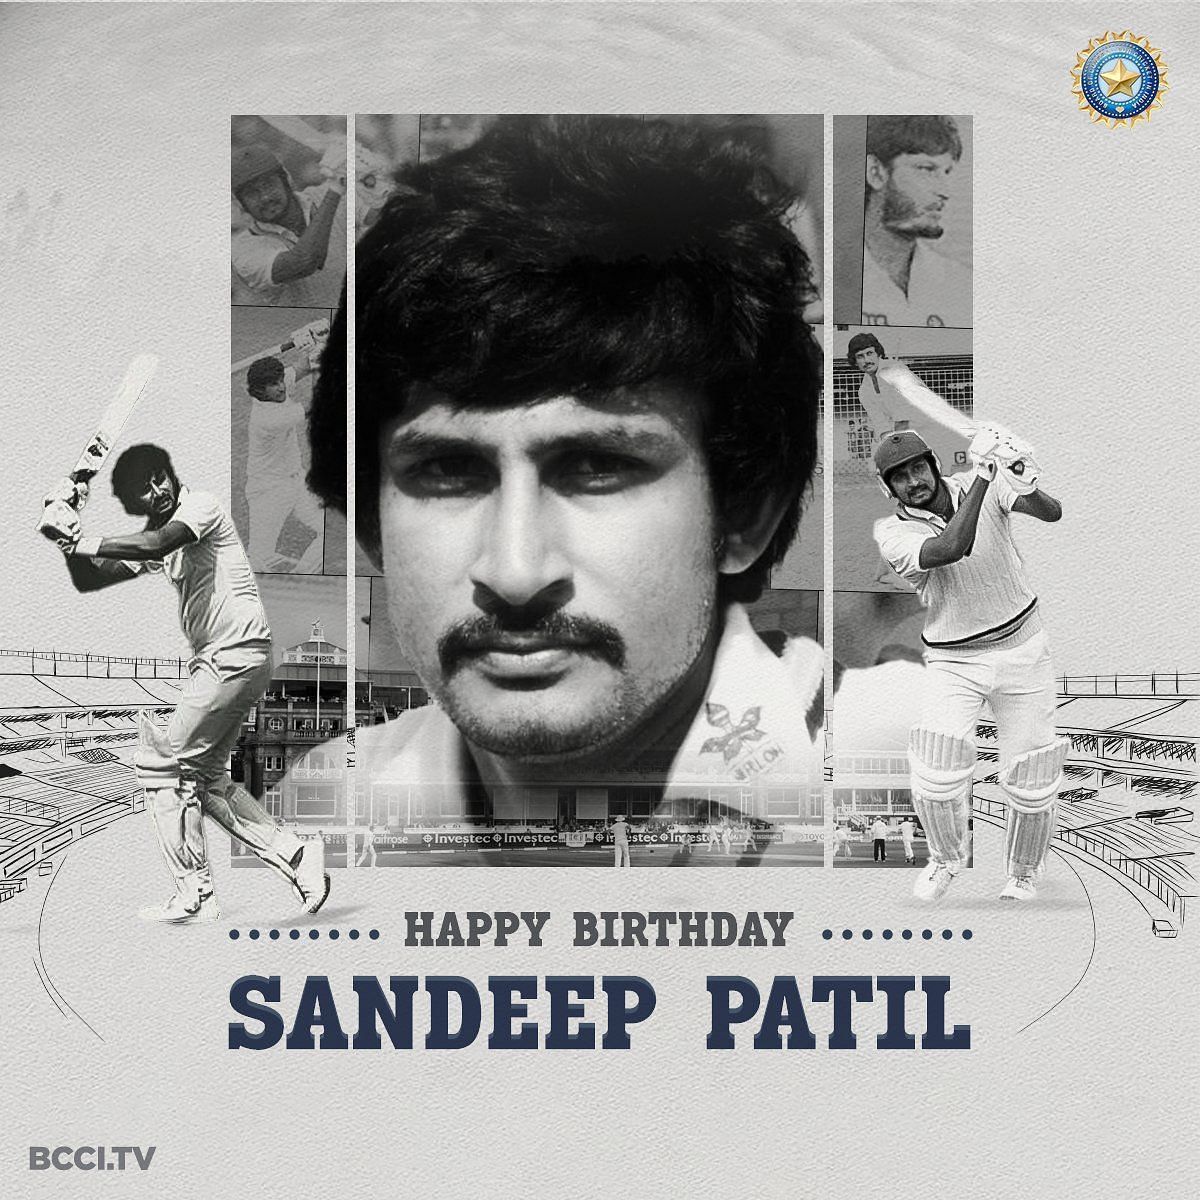 Sandeep Patil played an important role in 1983 World Cup. Pic: Twitter/@BCCI 